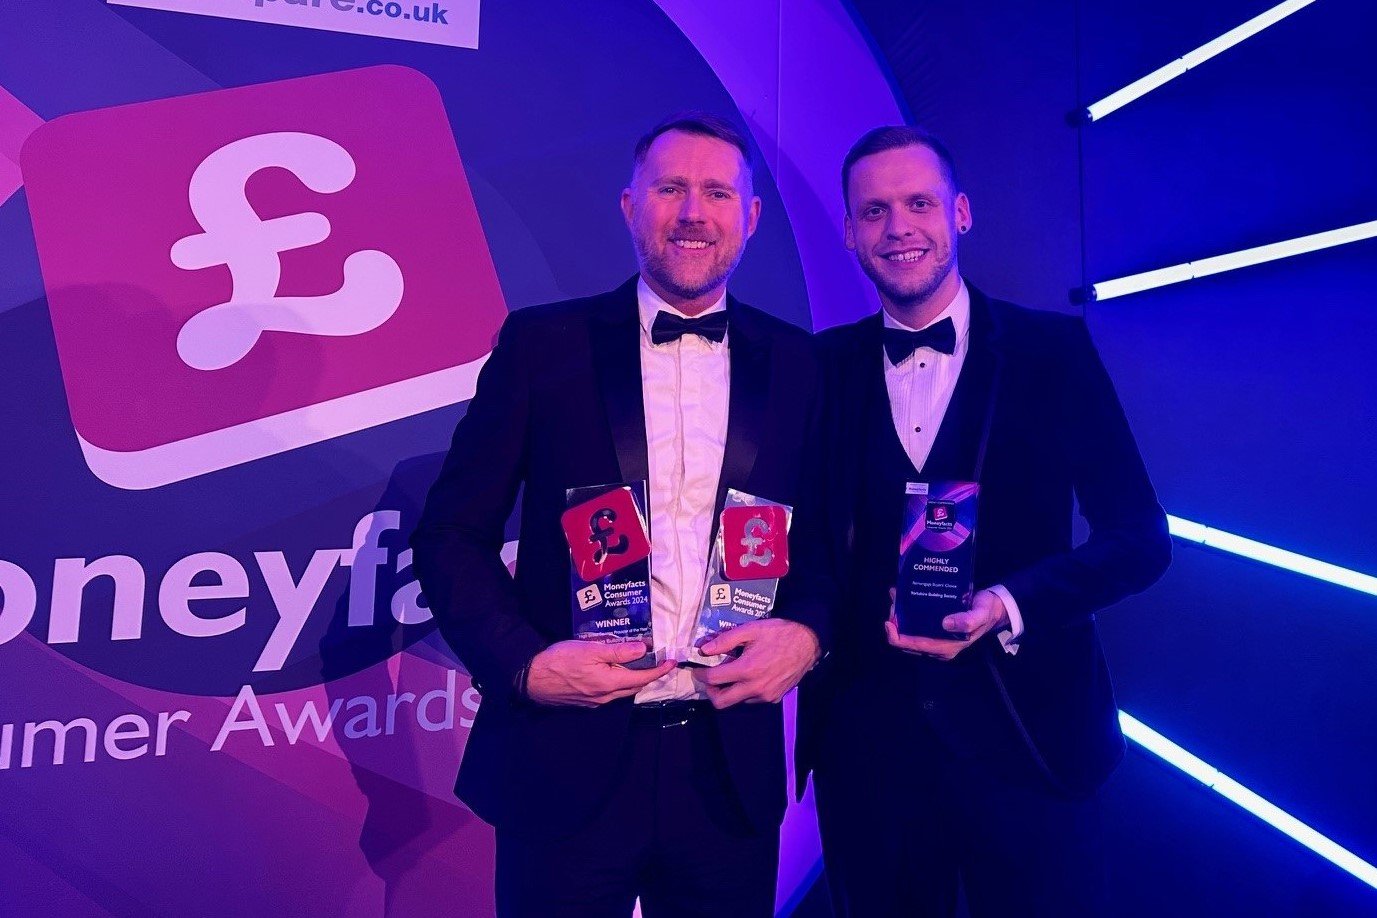 Wayne Measor director of retail distribution and transformation at Yorkshire Building Society collected the awards for High Street Savings and Mortgage Provider of the Year 2024 alongside James Brooks website editor of Moneyfacts.